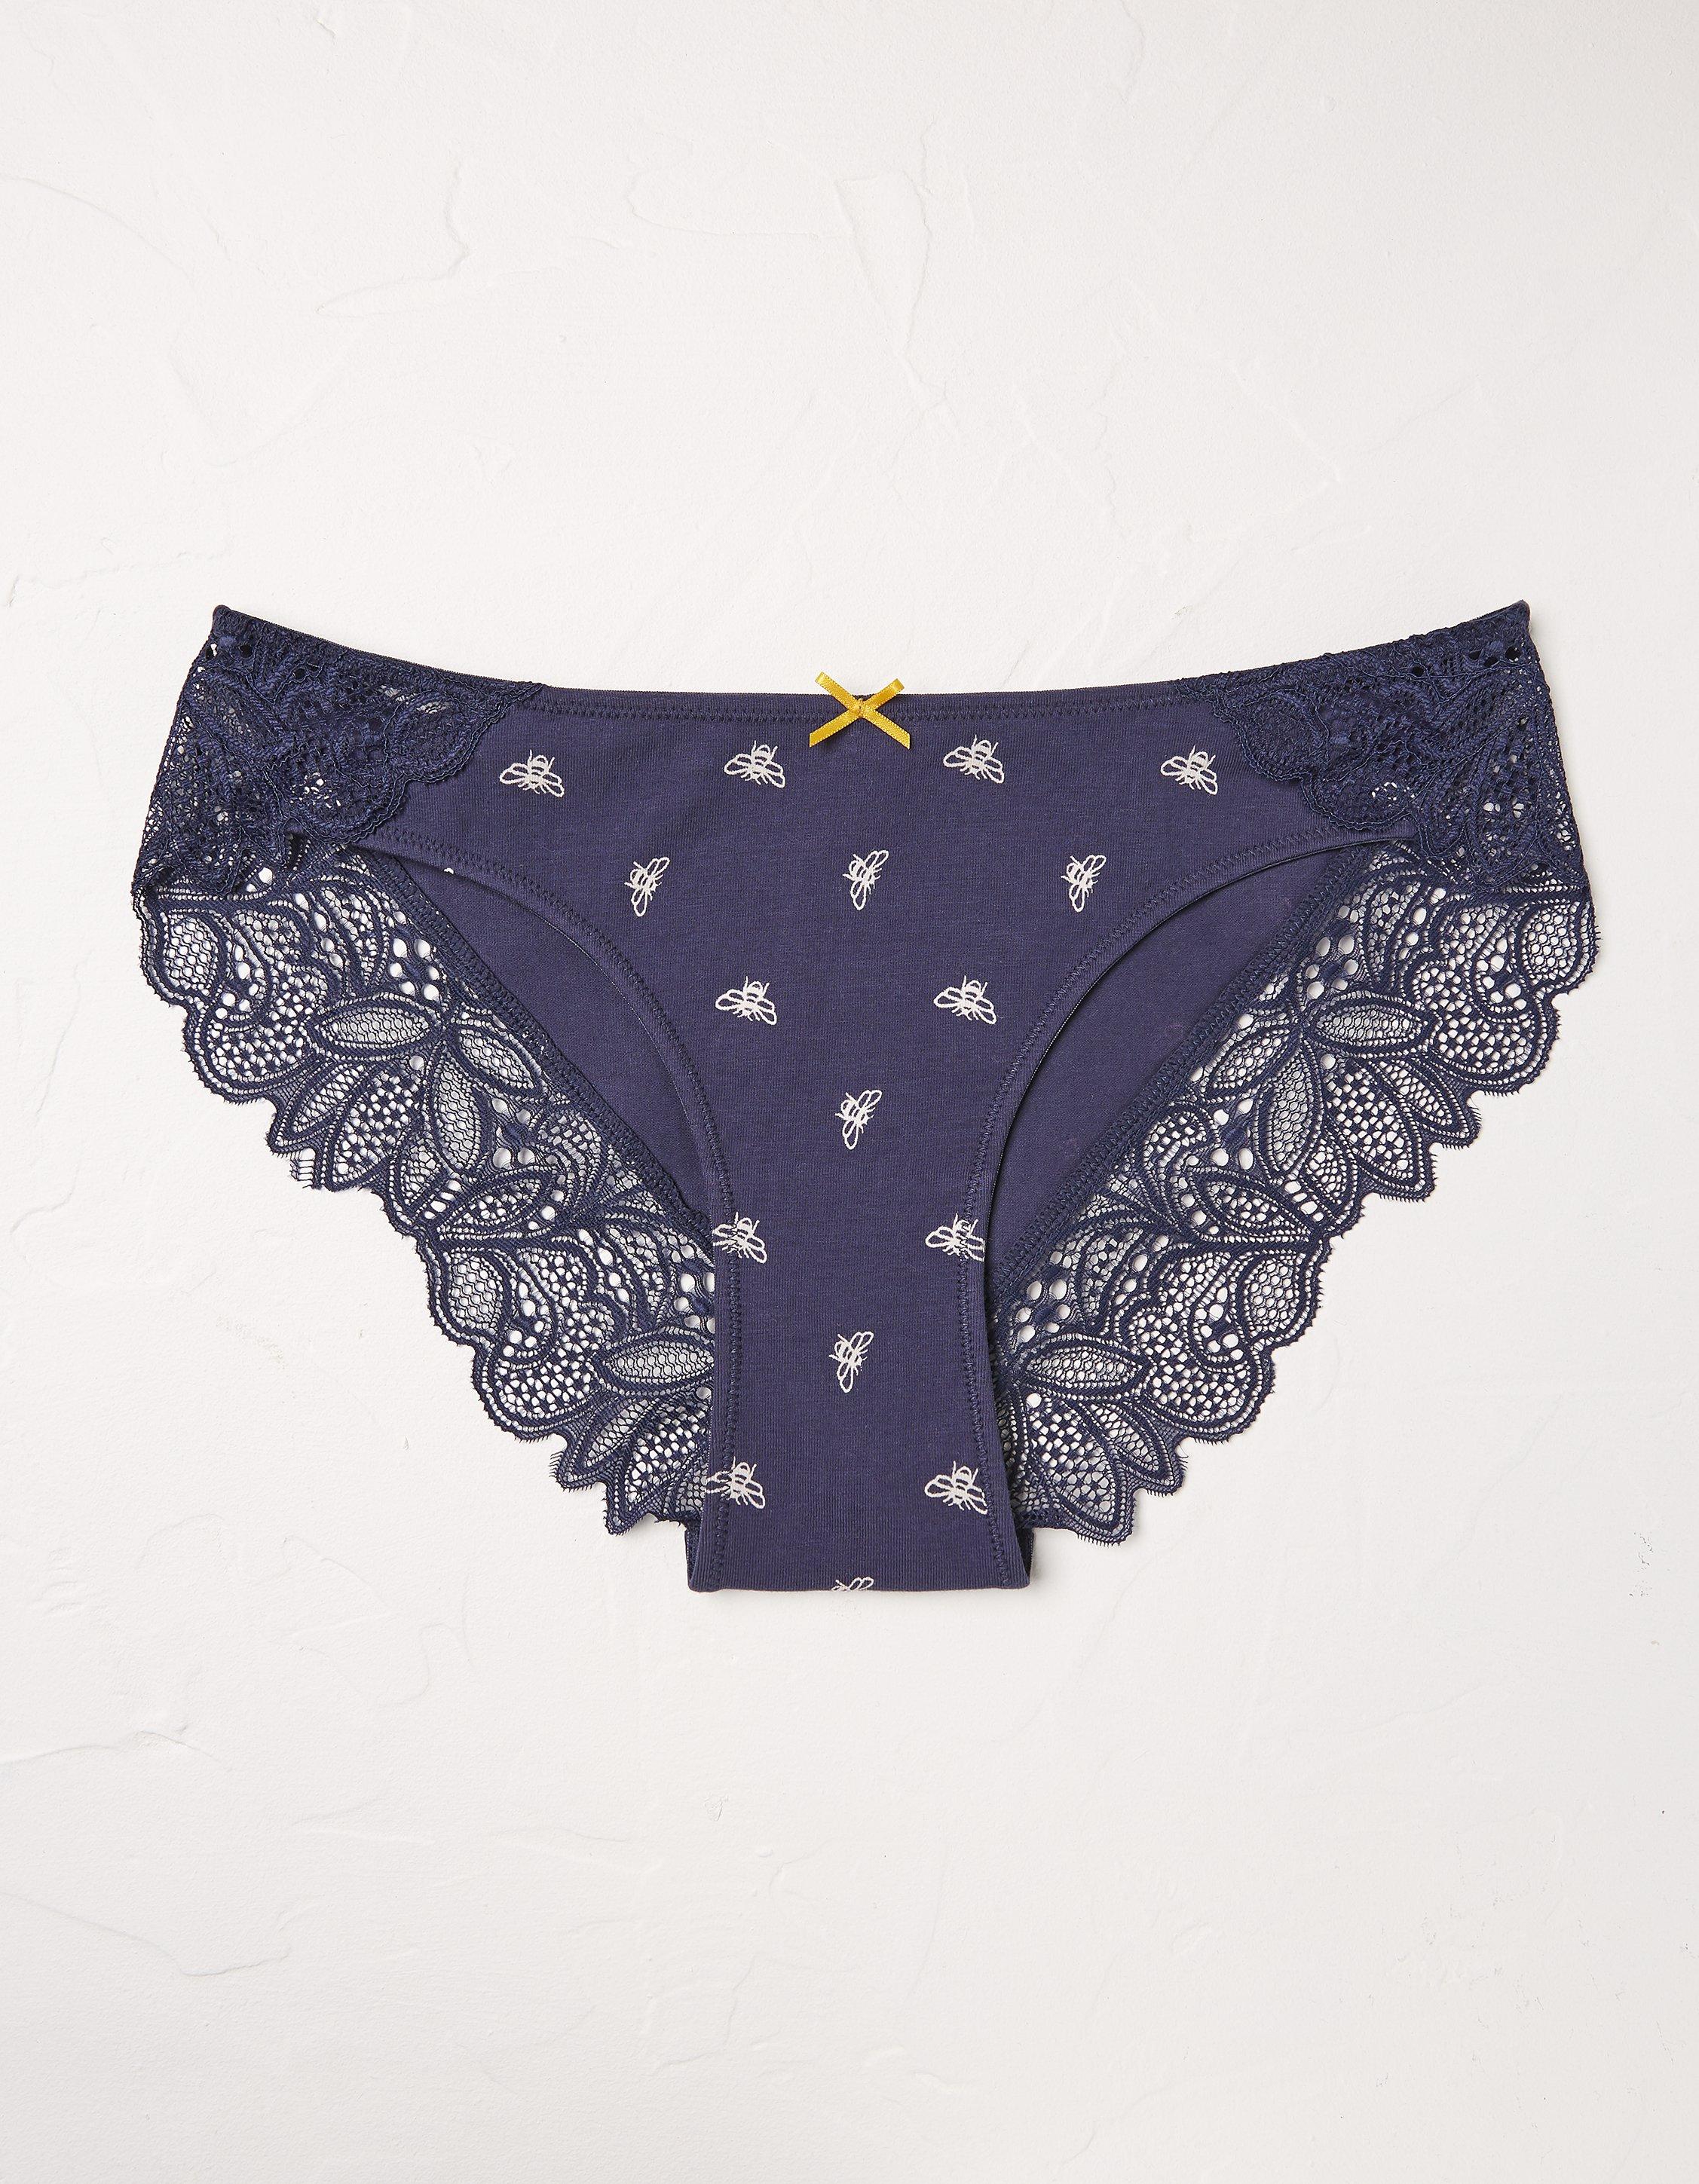 Women's Cotton Cheeky Underwear with Lace Waistband - Auden Blue Size Small  4-6